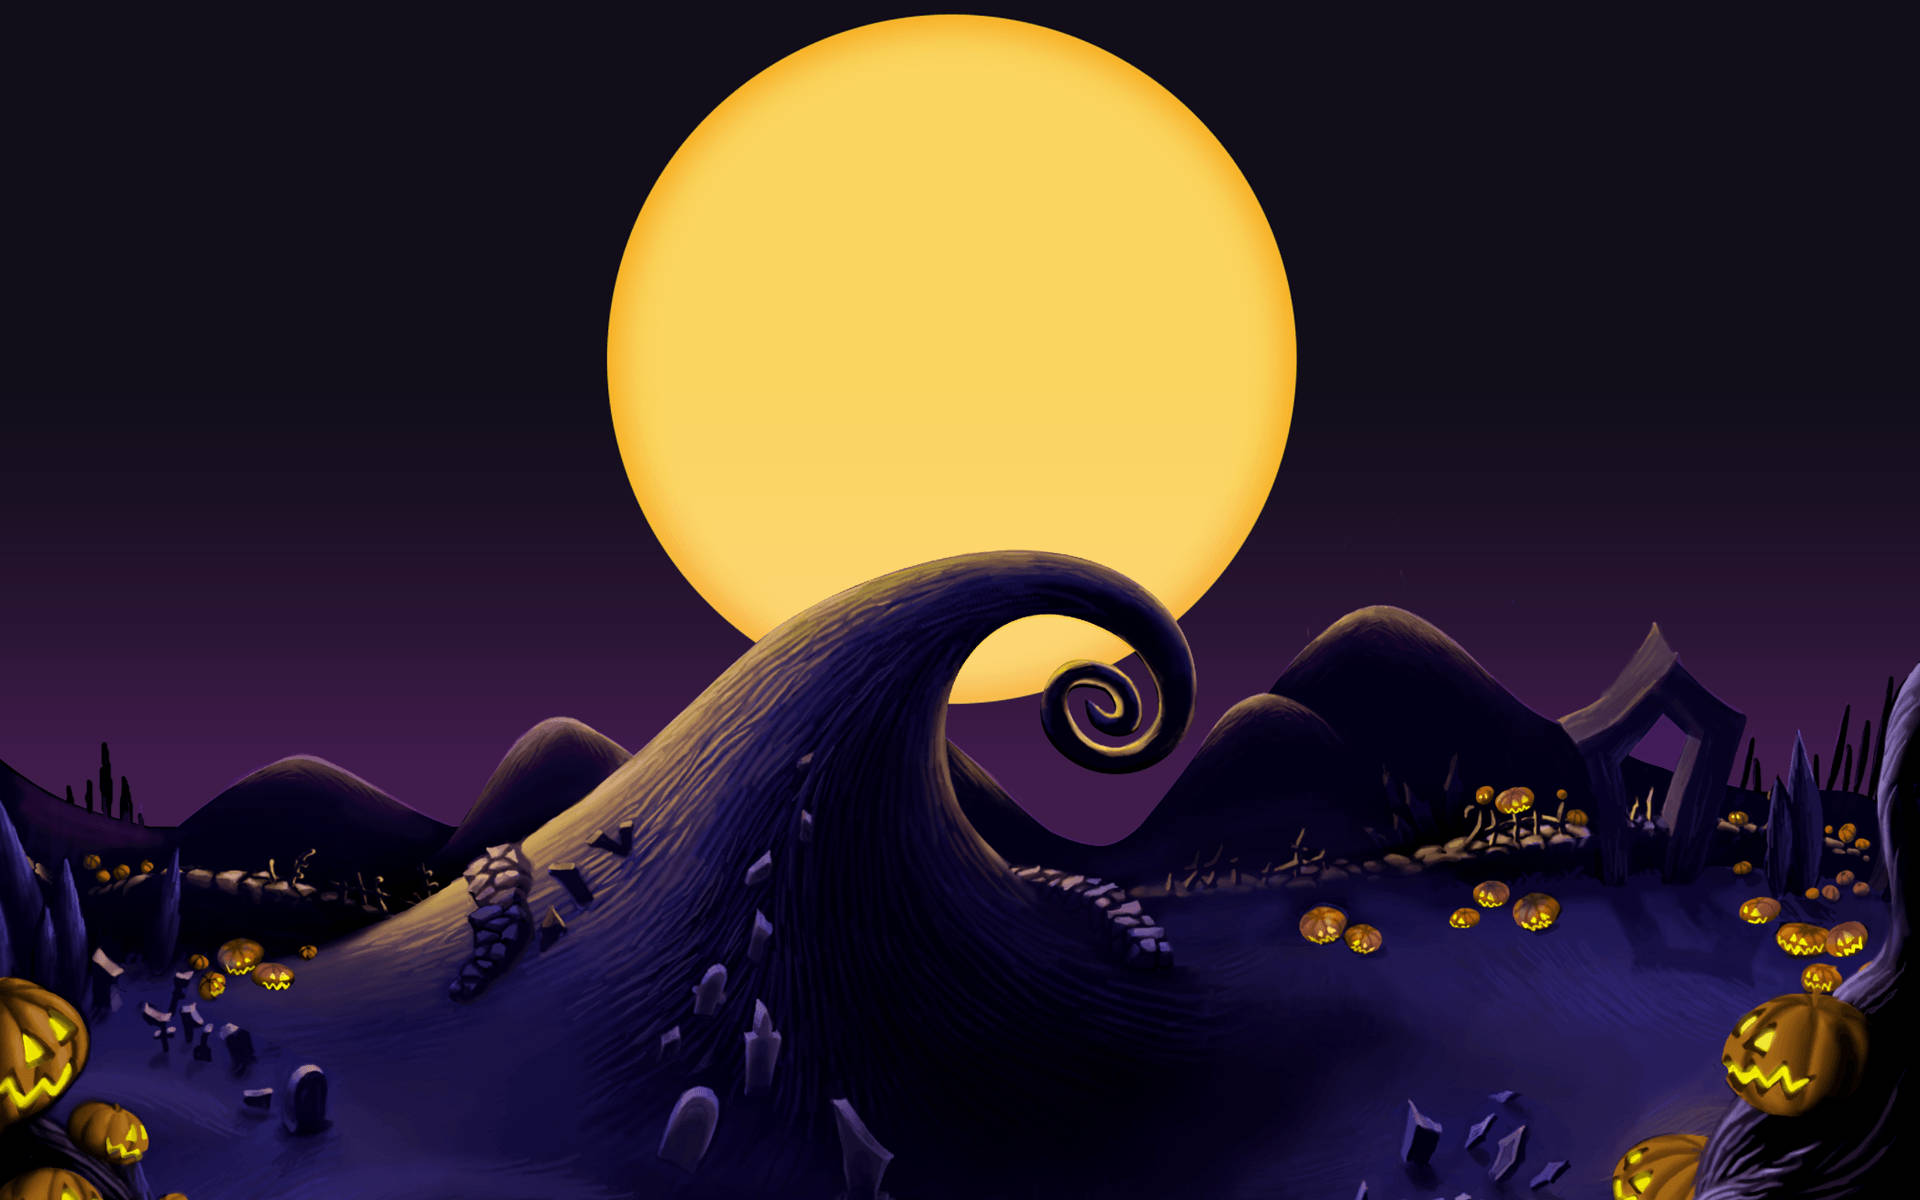 Take a magical journey to Halloween Town, with The Nightmare Before Christmas! Wallpaper